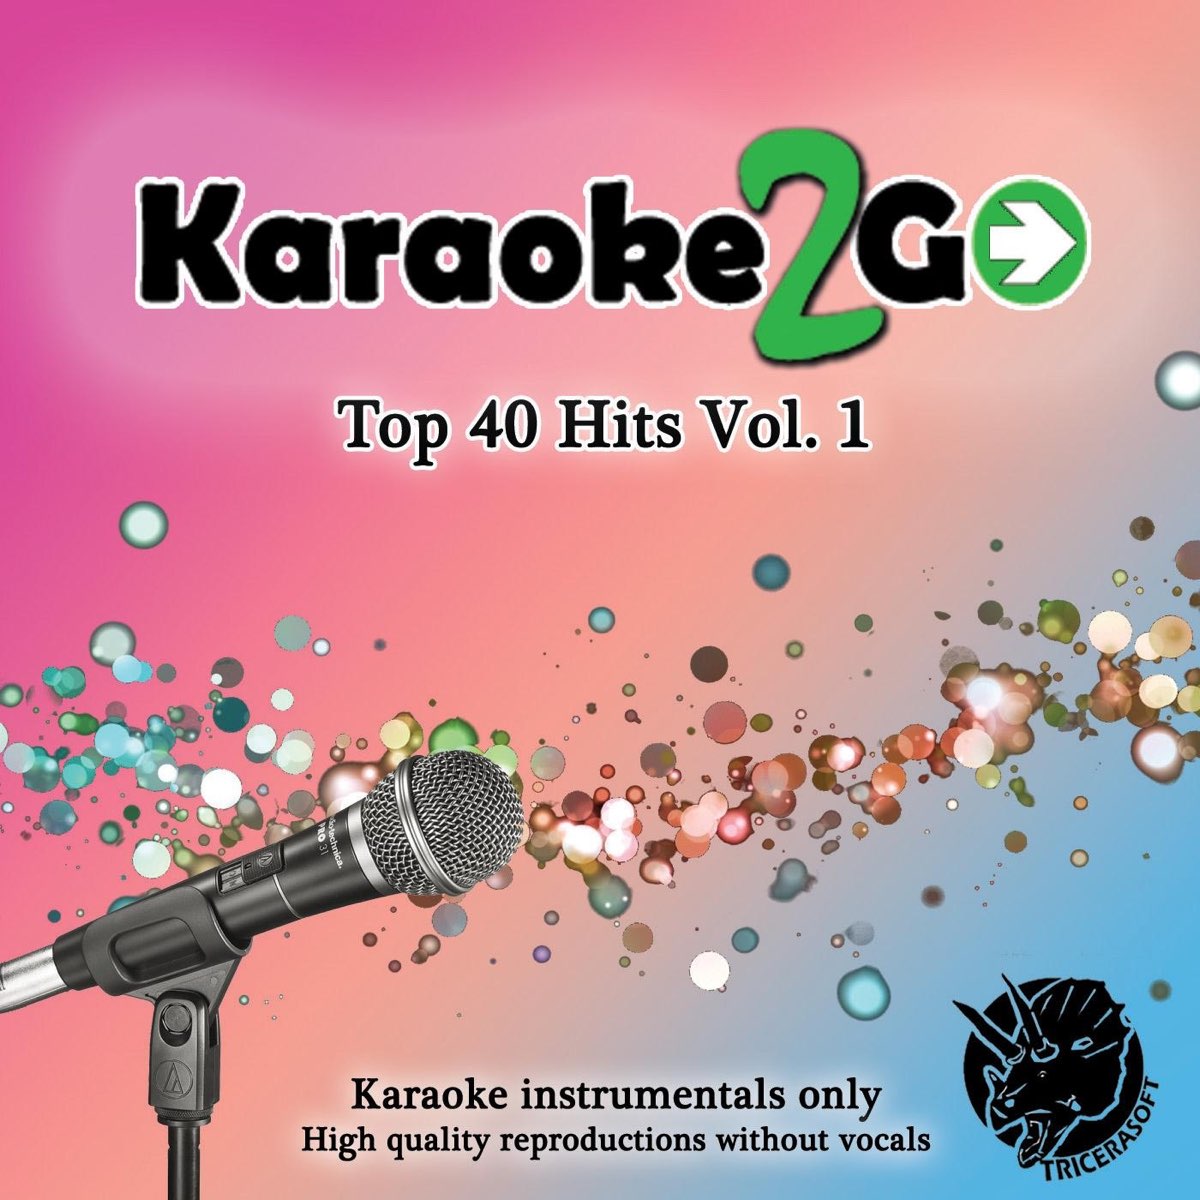 Karaoke go. Stay with me караоке. Njoy караоке. Караоке 2 * 2 4.